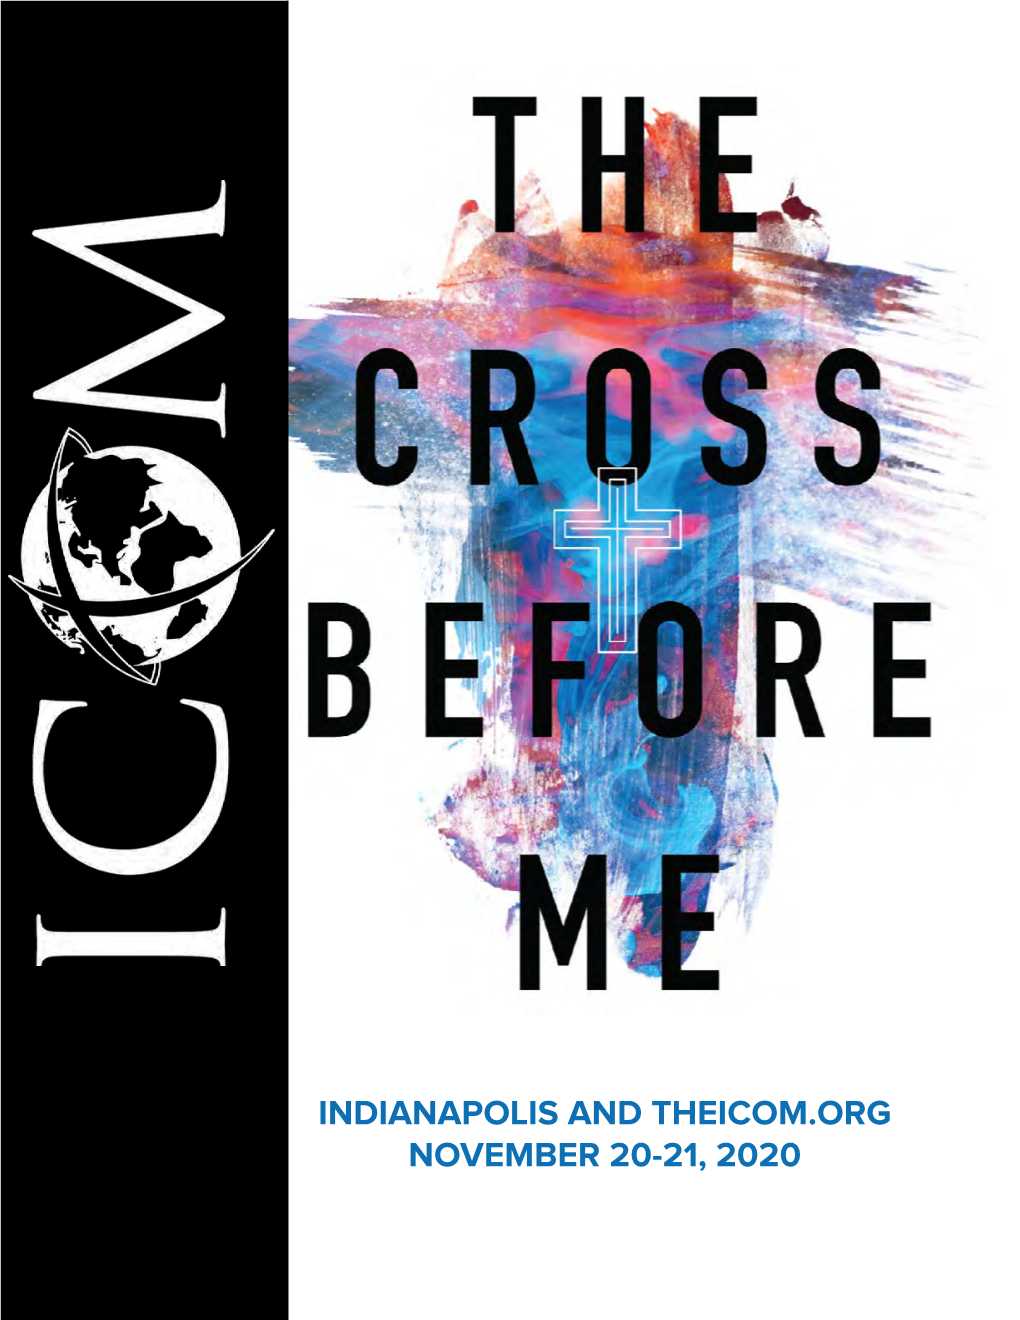 INDIANAPOLIS and THEICOM.ORG NOVEMBER 20-21, 2020 SATURDAY | NOVEMBER 21 2020 SCHEDULE 7:30 A.M